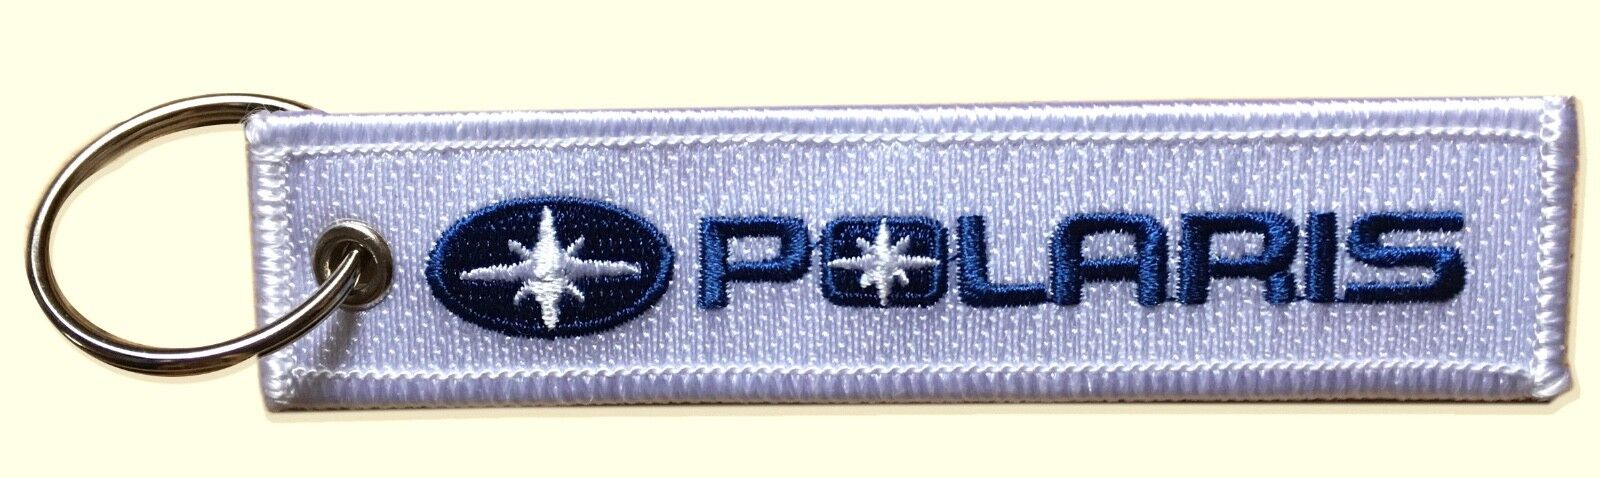 Polaris Embroidered Key Chain, for snowmobiles, off road, motorcycles, ATV 